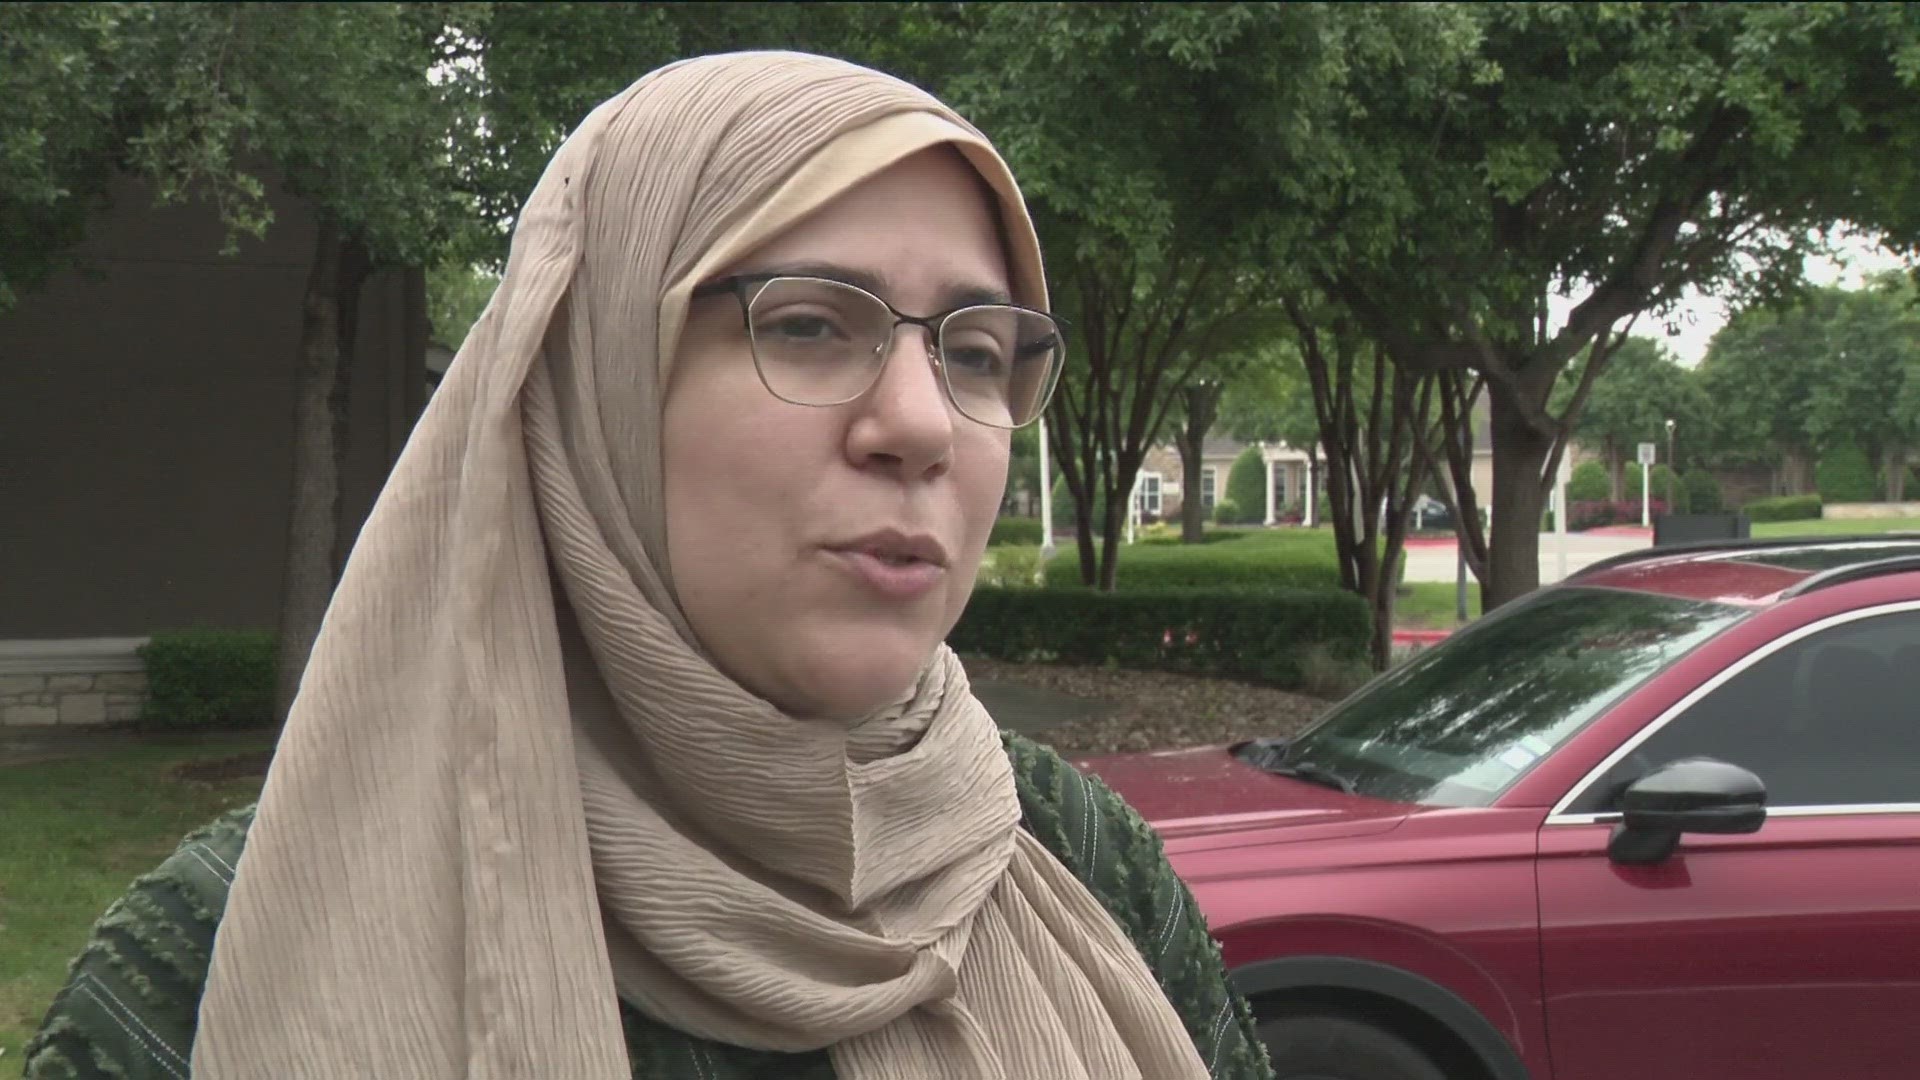 Advocates are calling on police to investigate an alleged attack on a Muslim UT student and his friend.